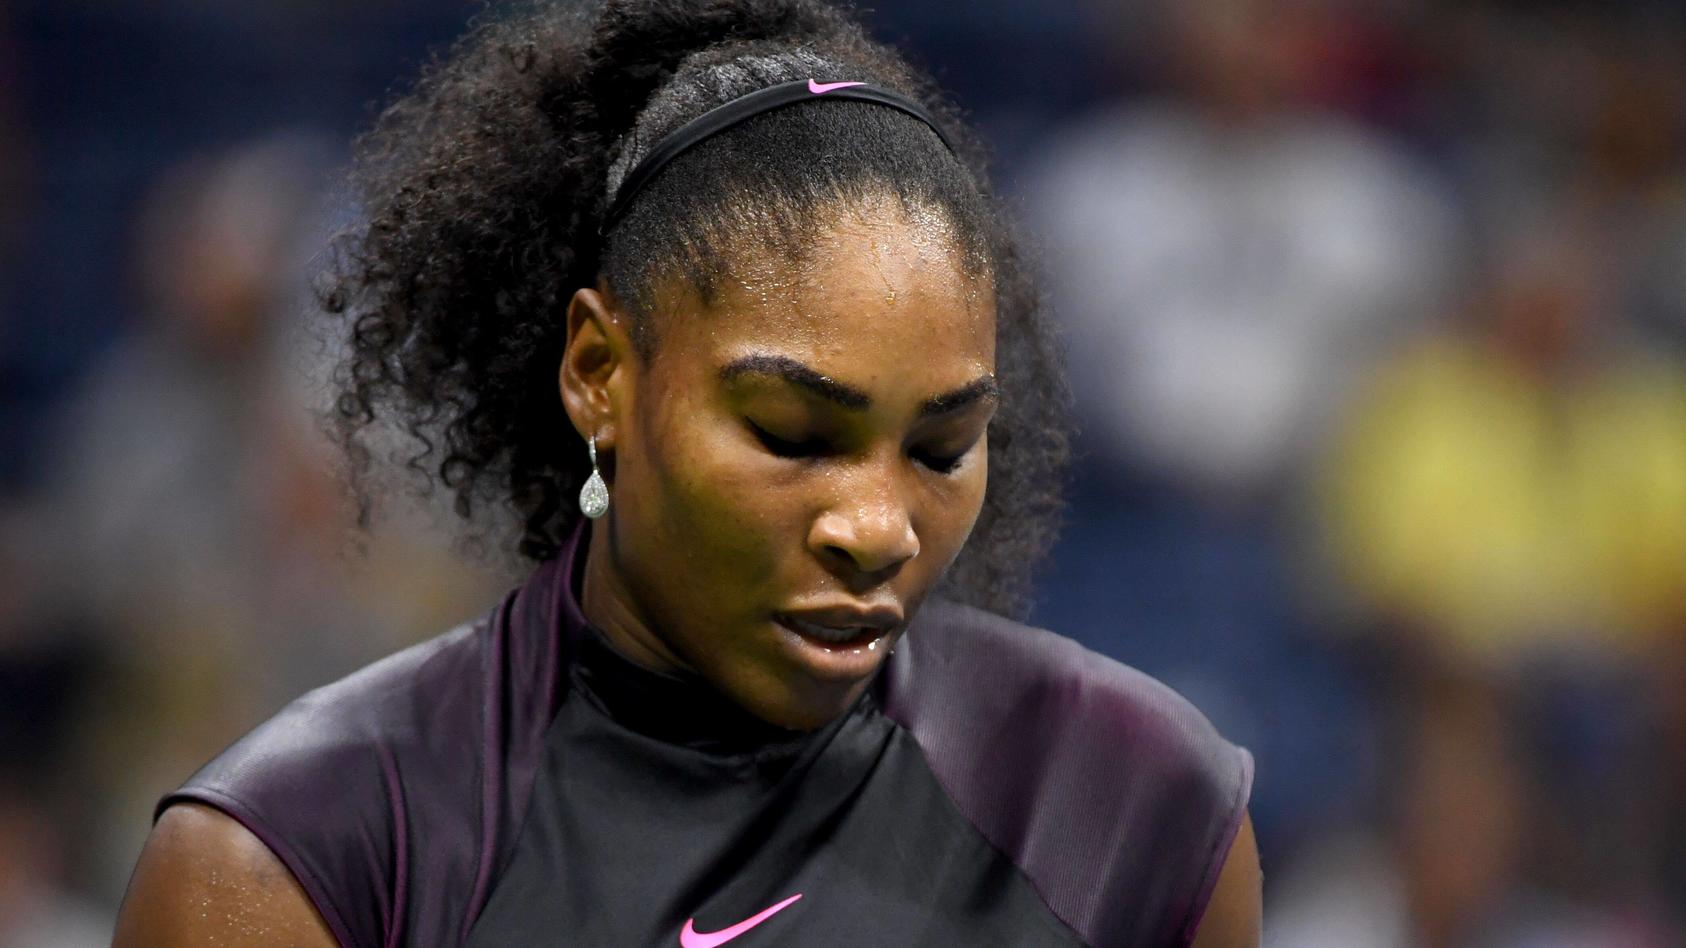 Mandatory Credit: Photo by Mike Frey/BPI/Shutterstock 5894731at Serena Williams reacts to her defeat against Karolina Pliskova in the Women s Singles Semi-Final of the US Open 2016 at the Billie Jean King National Tennis Centre, Queens, New York on t